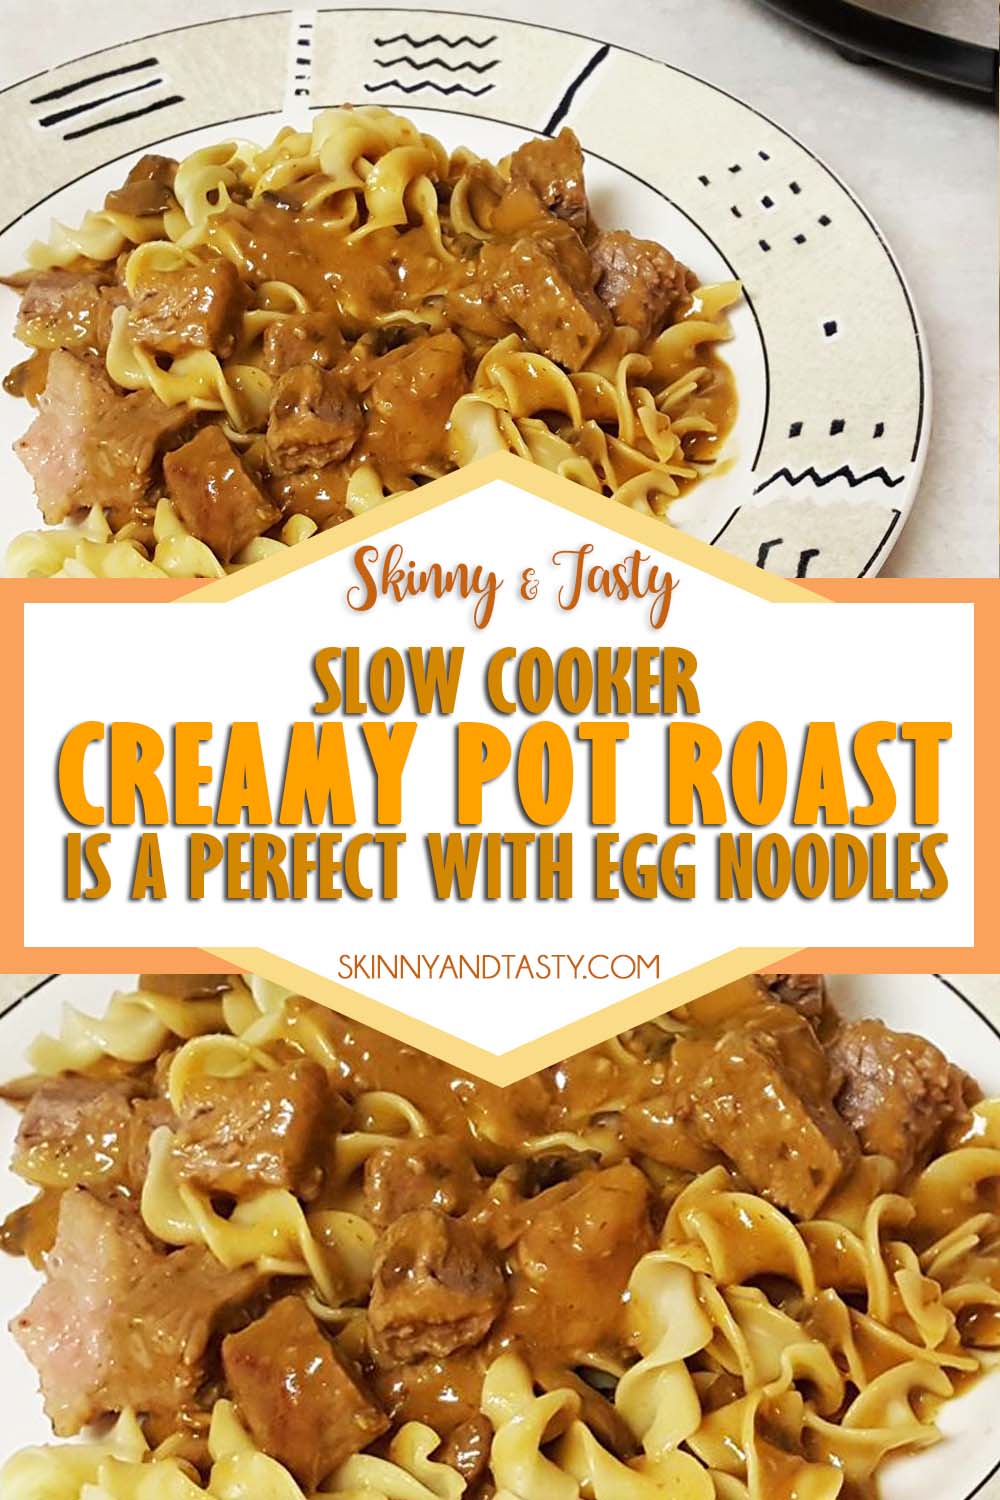 Slow Cooker Creamy Pot Roast is Perfect With Egg Noodles